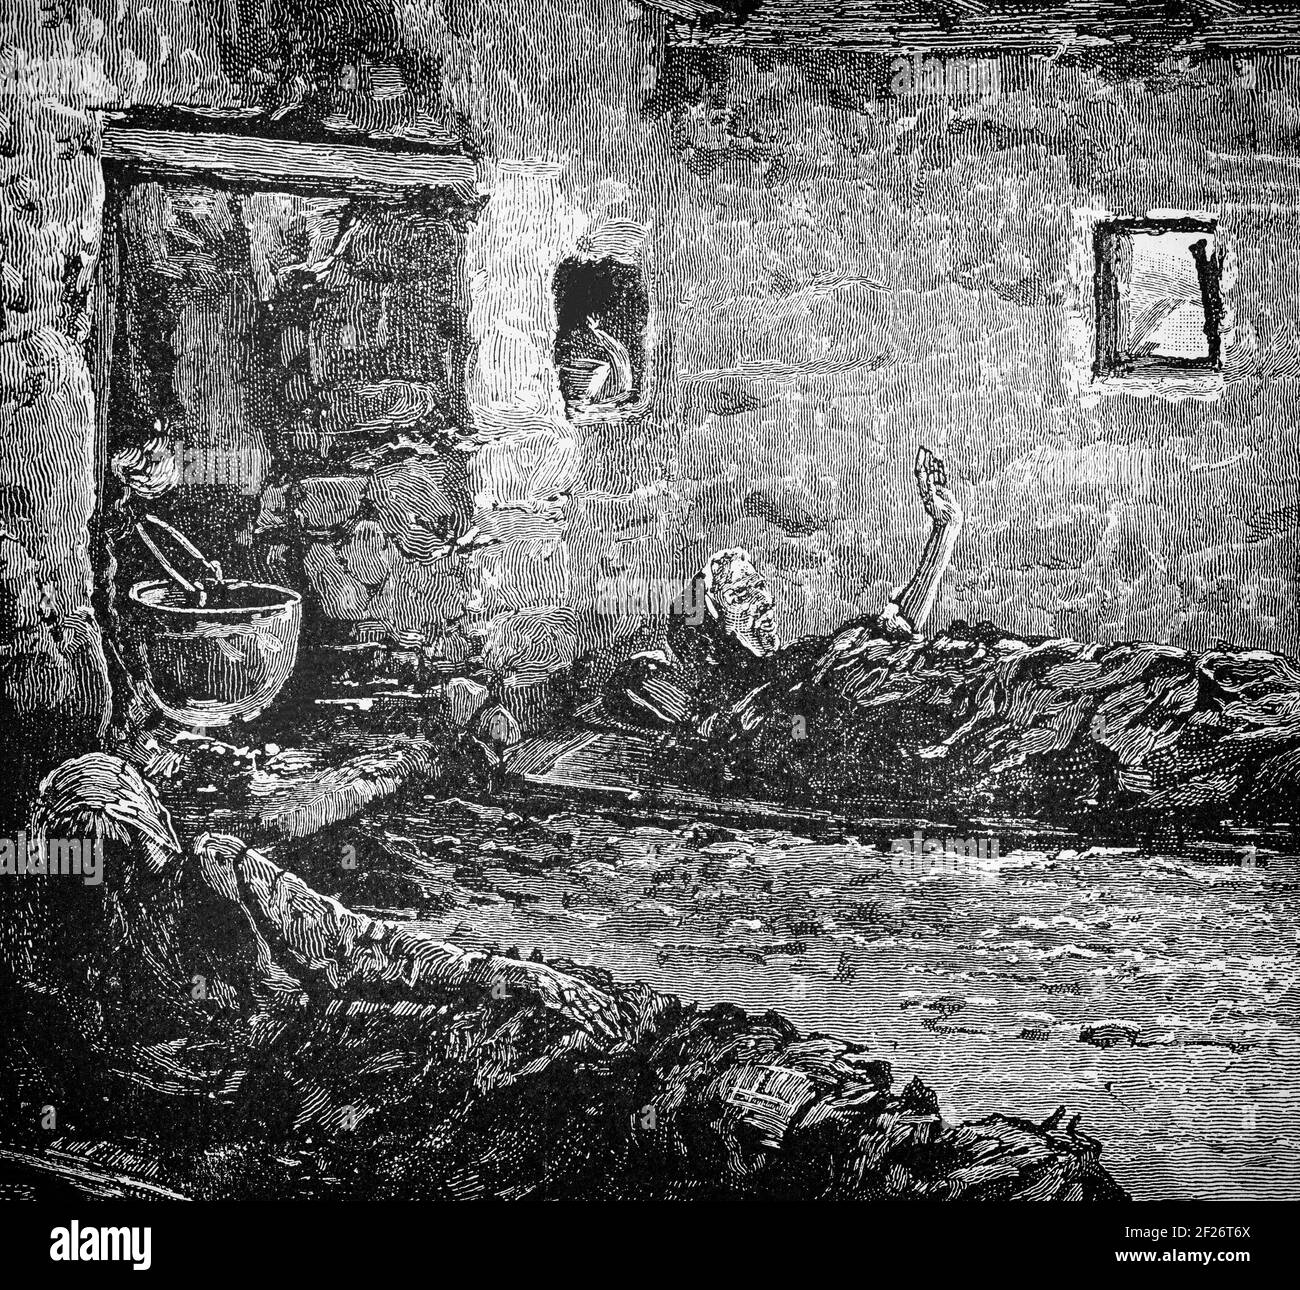 A 19th Century illustration of an old Irish woman in her Connemara cottage in County Galway, dying from starvation during the Great Famine, a period of mass starvation and disease in Ireland from 1845 to 1852 in which about 1 million people died and more than a million fled the country. The main cause was a blight that infected potato crops. It's effects were exacerbated by single-crop dependence, absentee landlordism and the British Whig government's policy of laissez-faire capitalism. Stock Photo